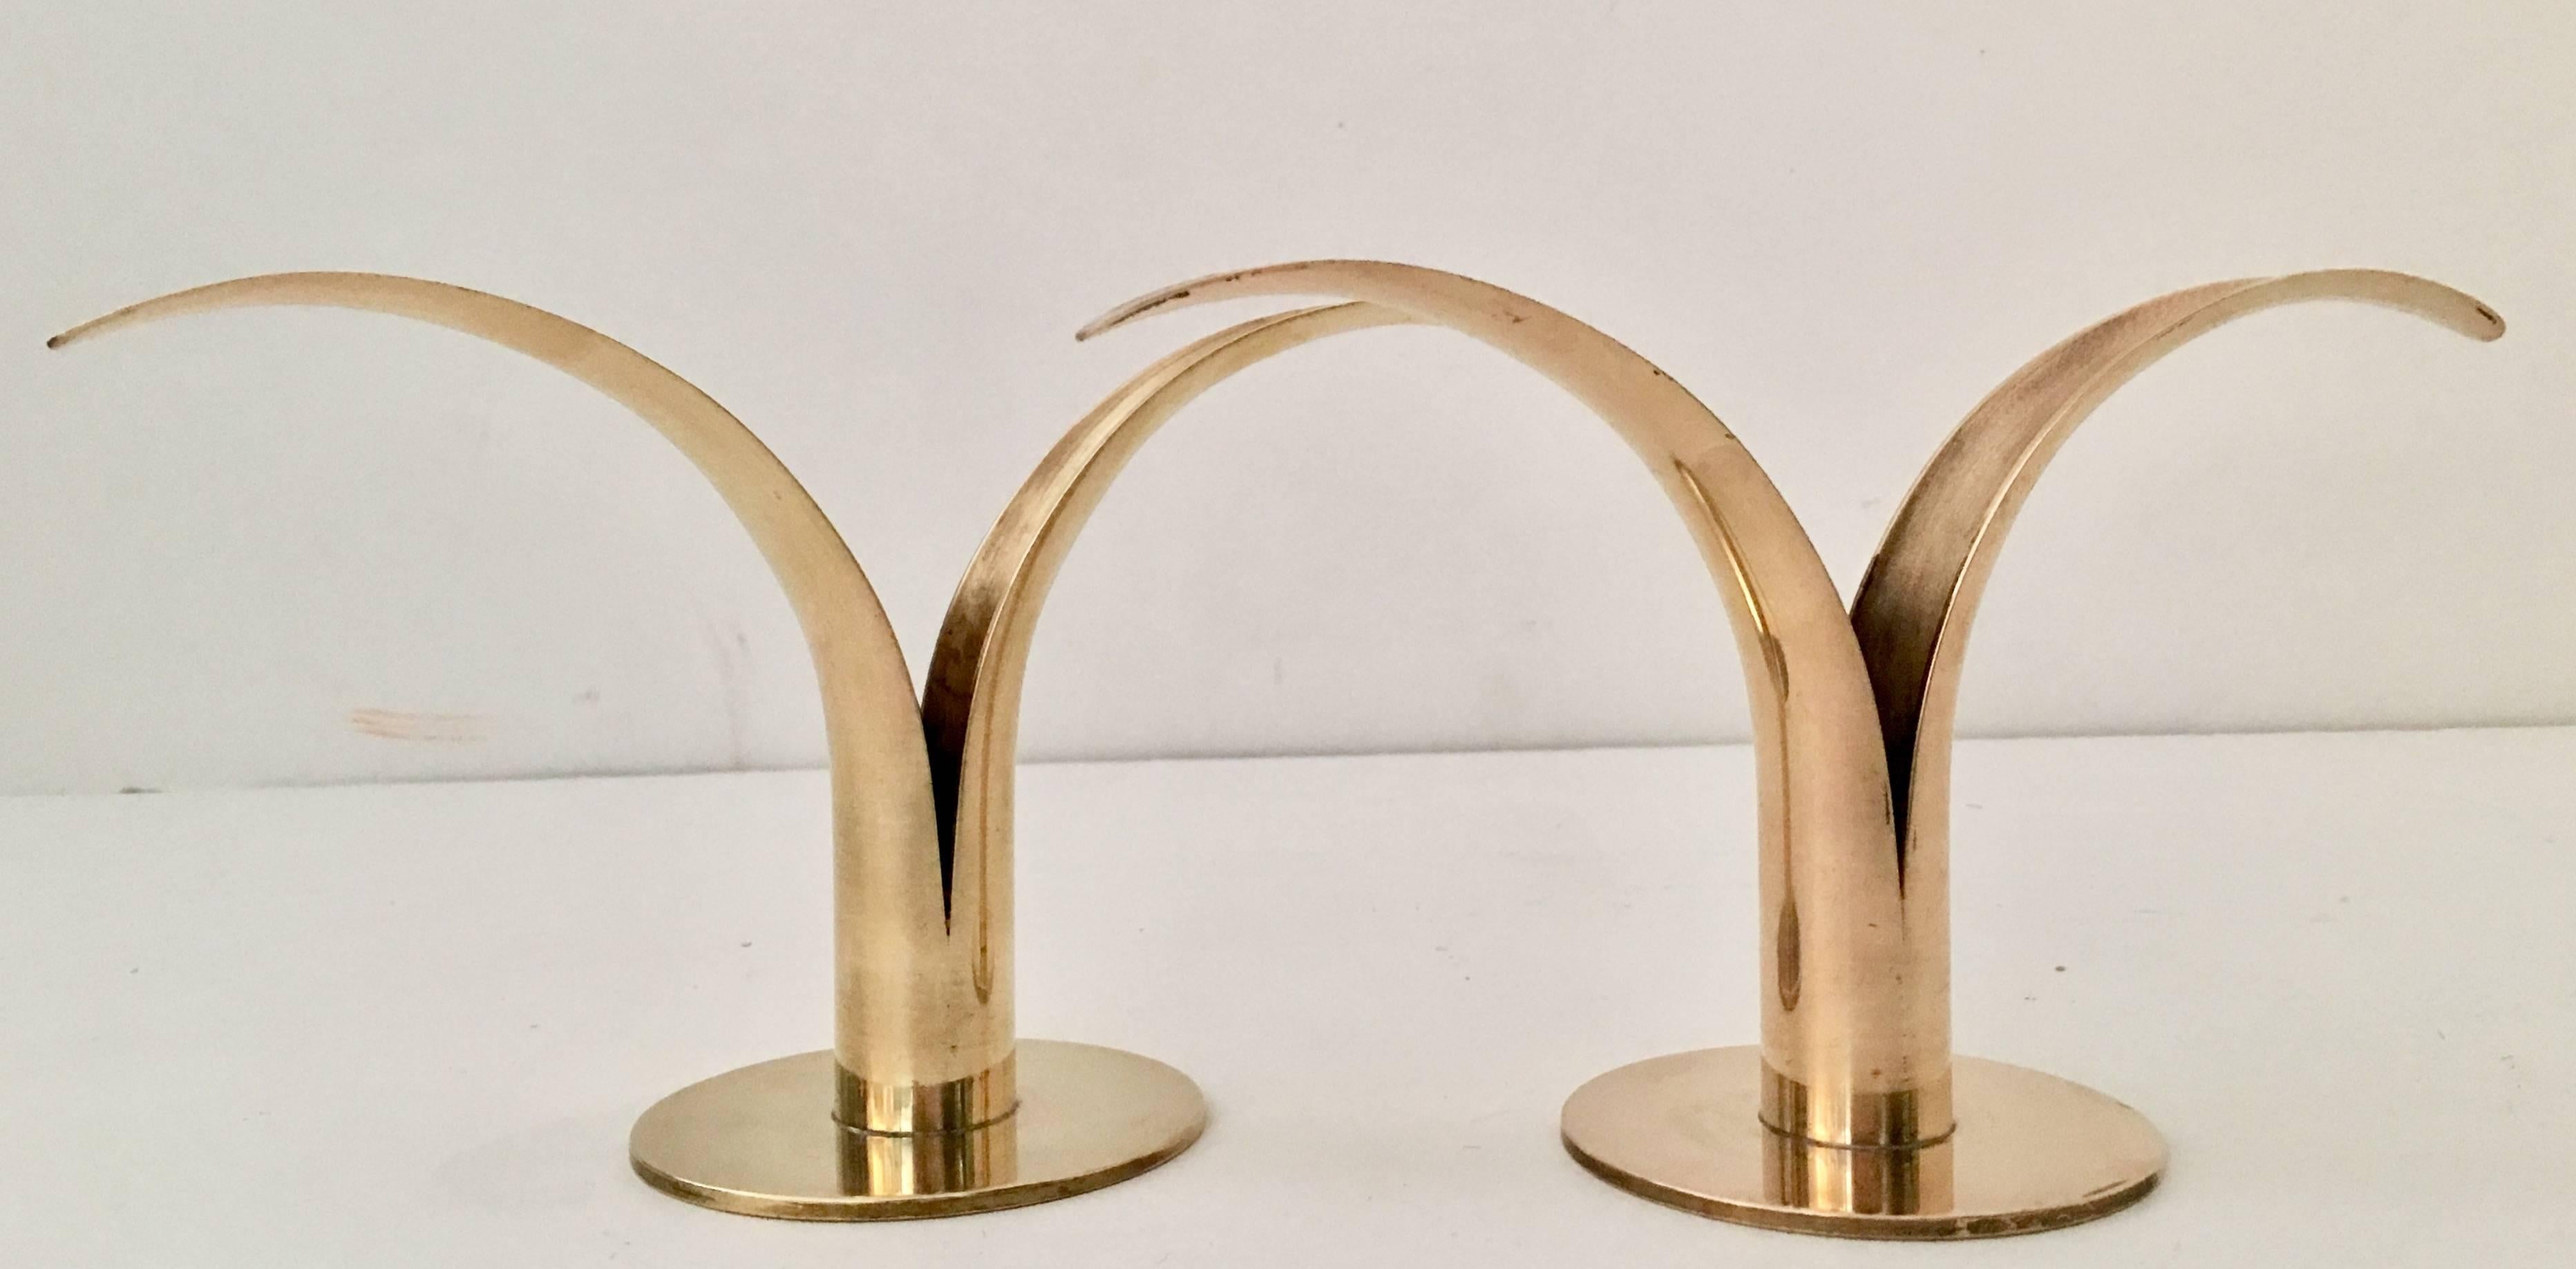 Swedish pair of solid brass Mid-Century Modern "Lily" candlestick holders.
Both are signed on the underside, Ystad-Metall. Made in Sweden.